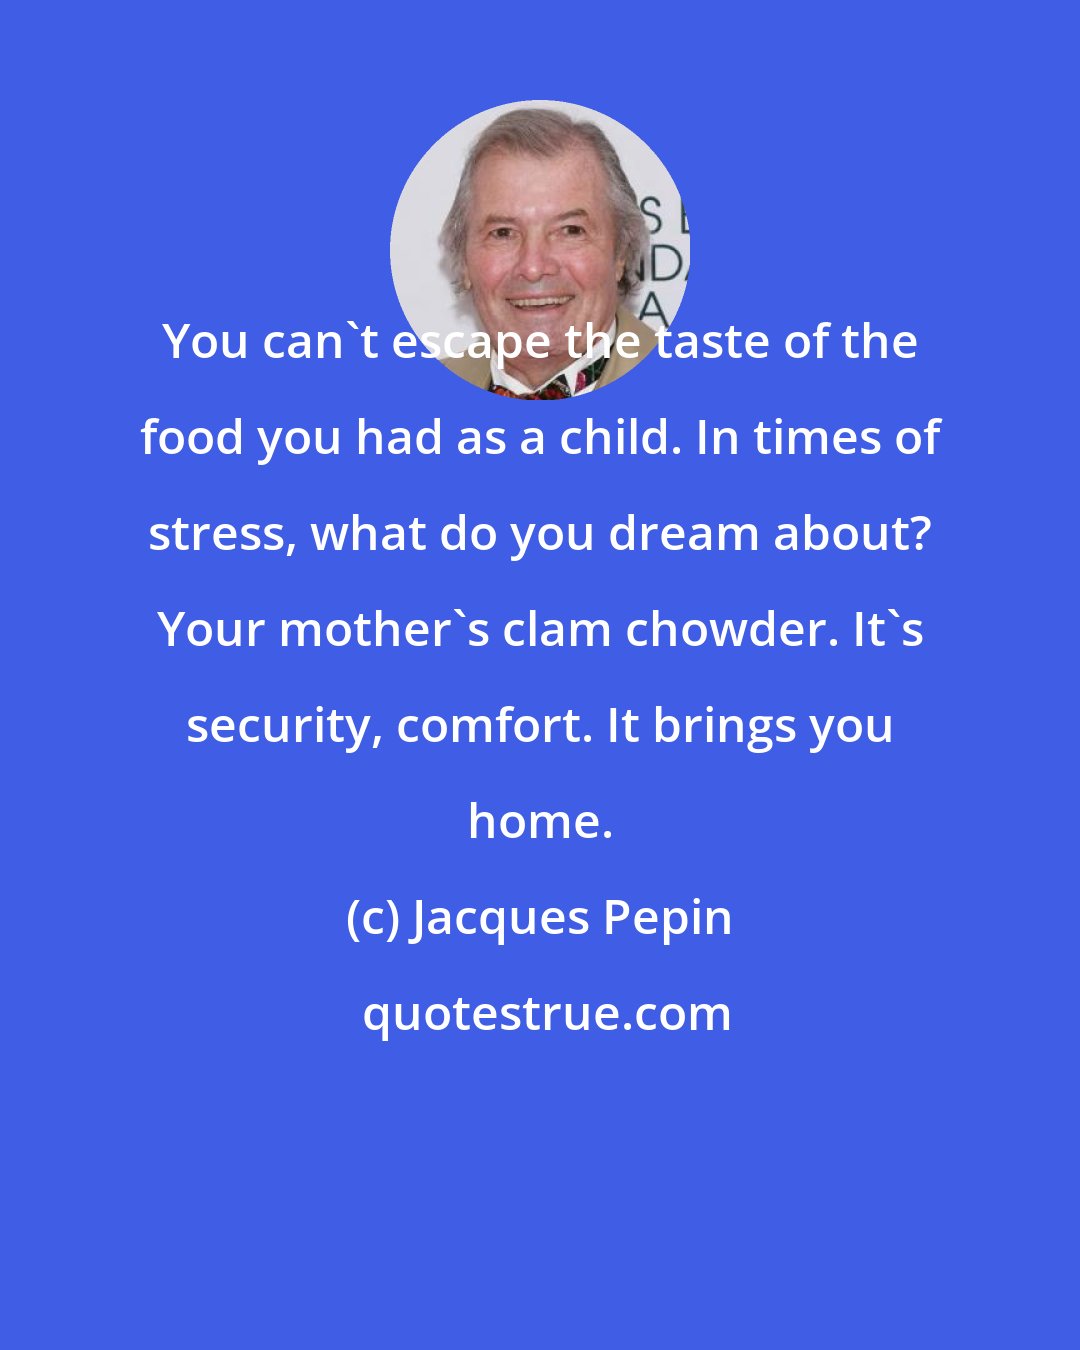 Jacques Pepin: You can't escape the taste of the food you had as a child. In times of stress, what do you dream about? Your mother's clam chowder. It's security, comfort. It brings you home.